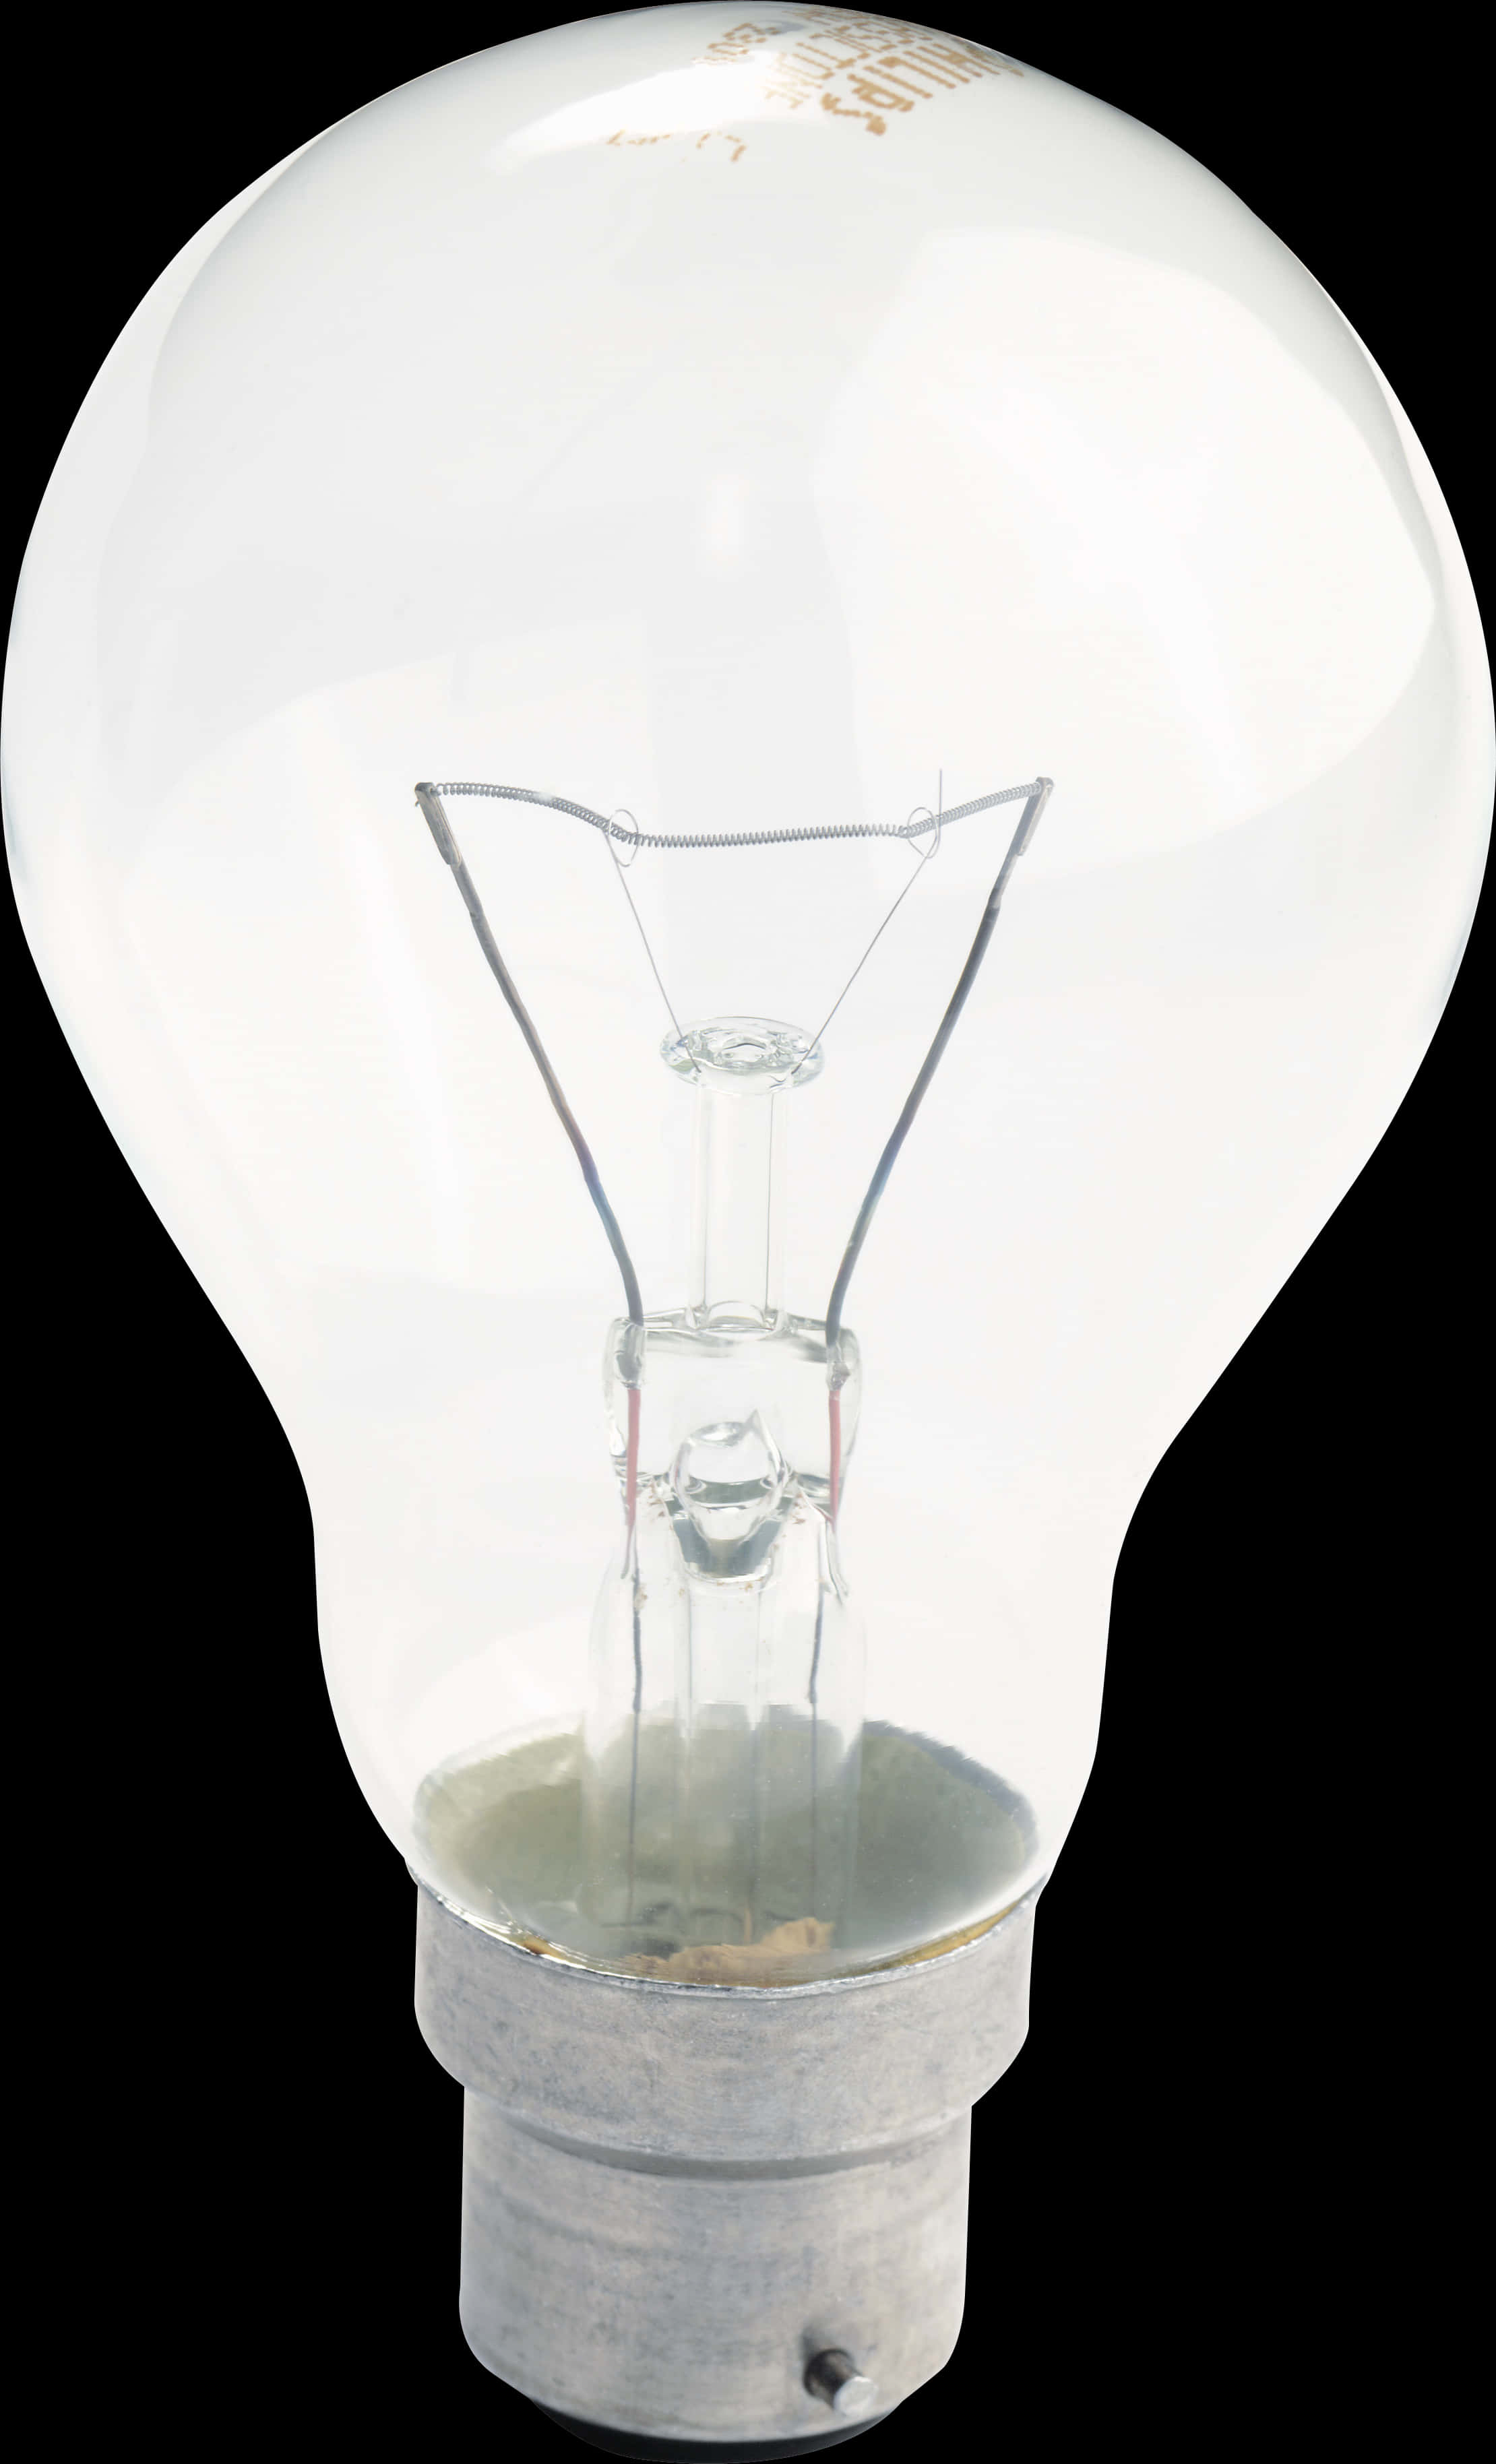 A Light Bulb With A Wire